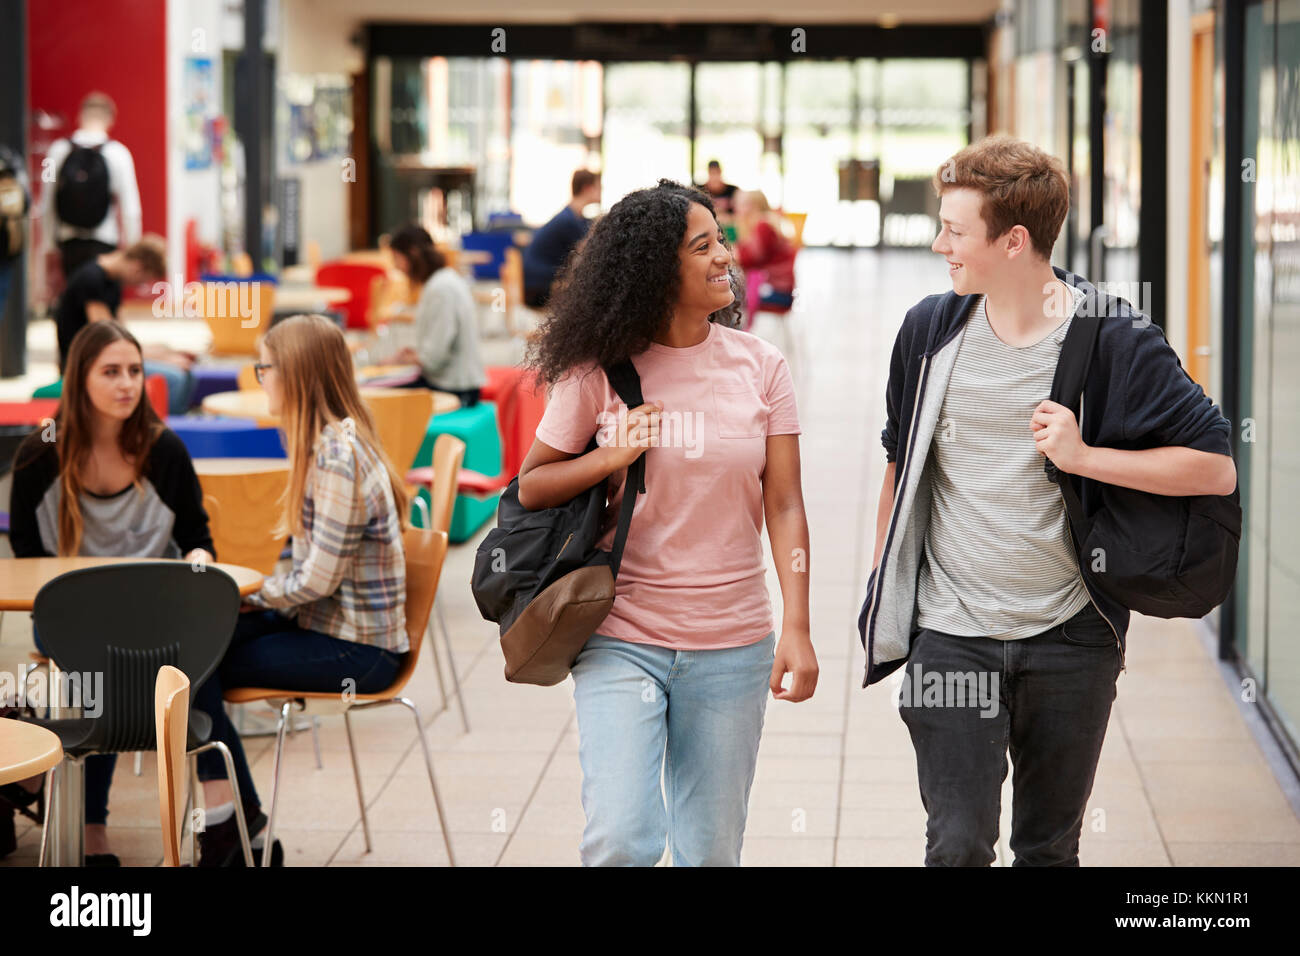 Communal Area Of Busy College Campus With Students Stock Photo